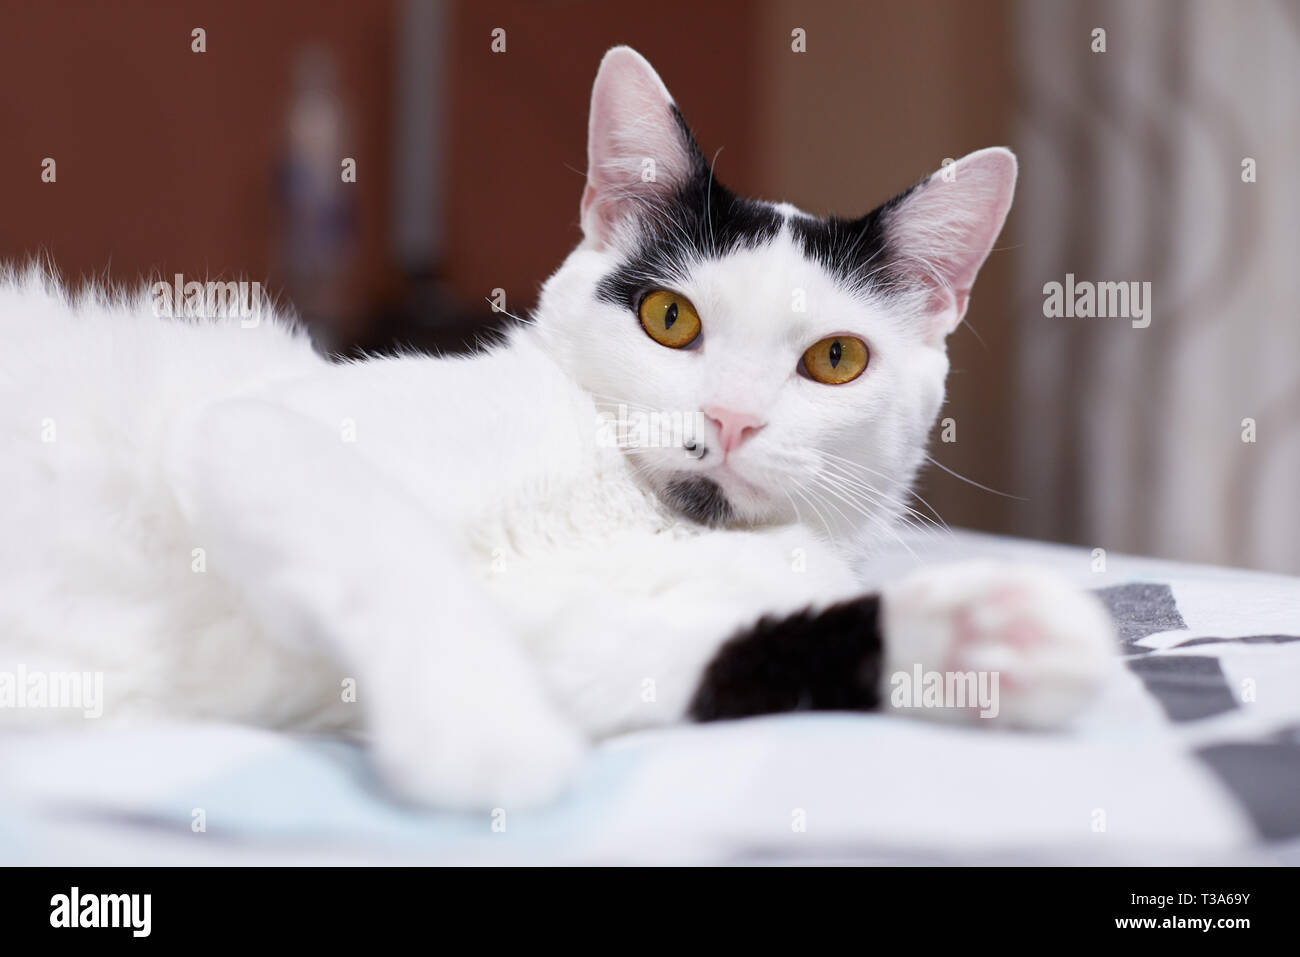 A relaxed white cat with black markings is relaxing on a bed at home and feels happy Stock Photo